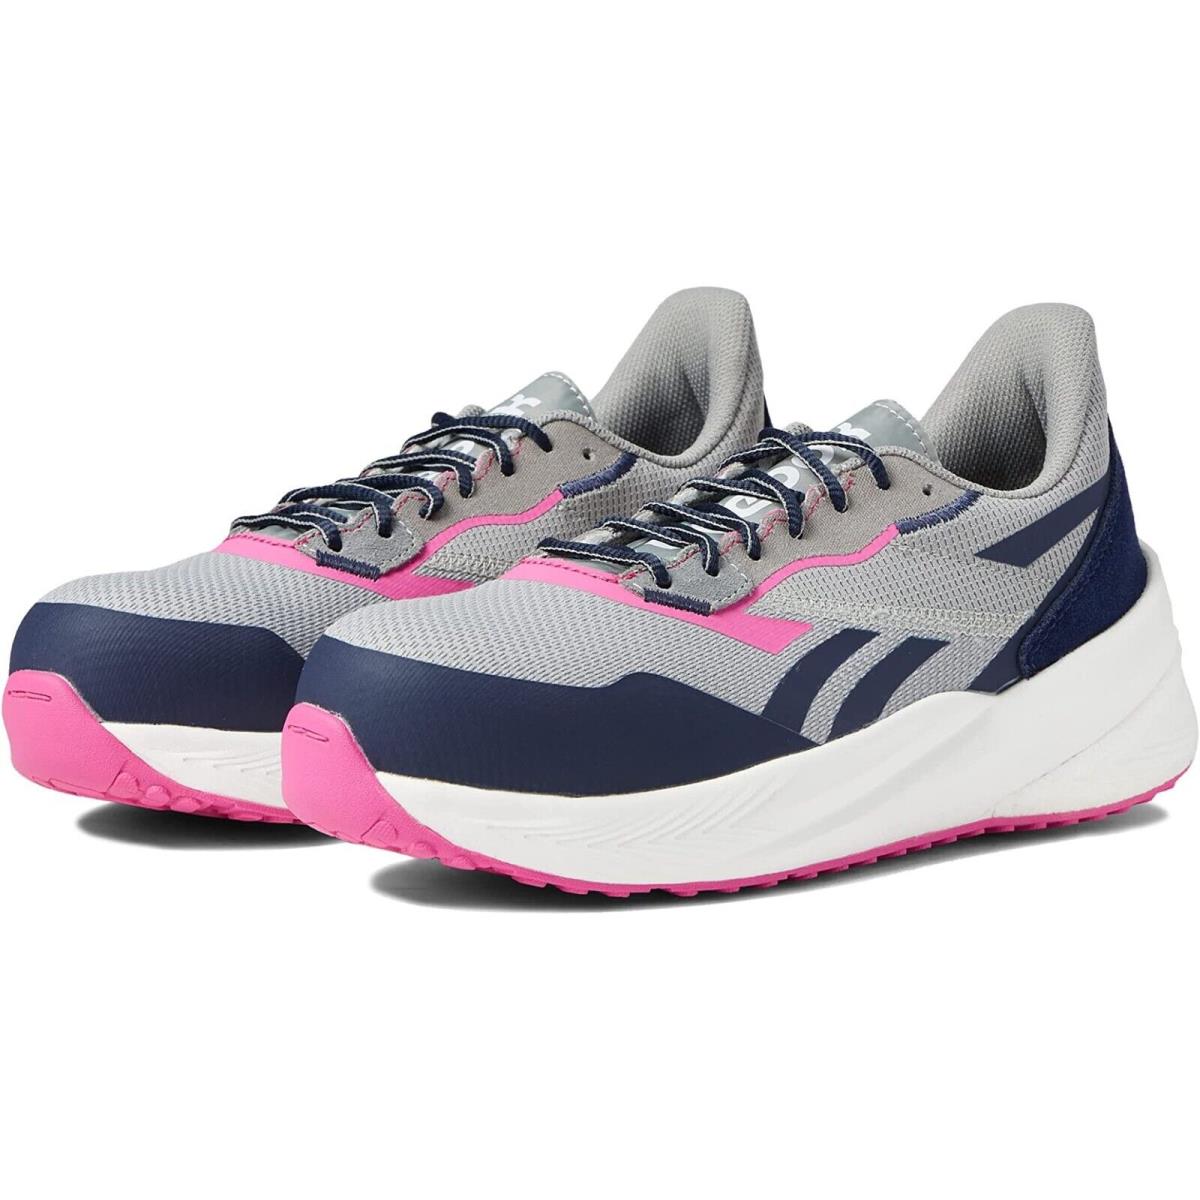 Reebok N7431 Work Womens Athletic Work Safety Shoes Casual Gray/navy/pink Size 7 - Gray/Navy/Pink